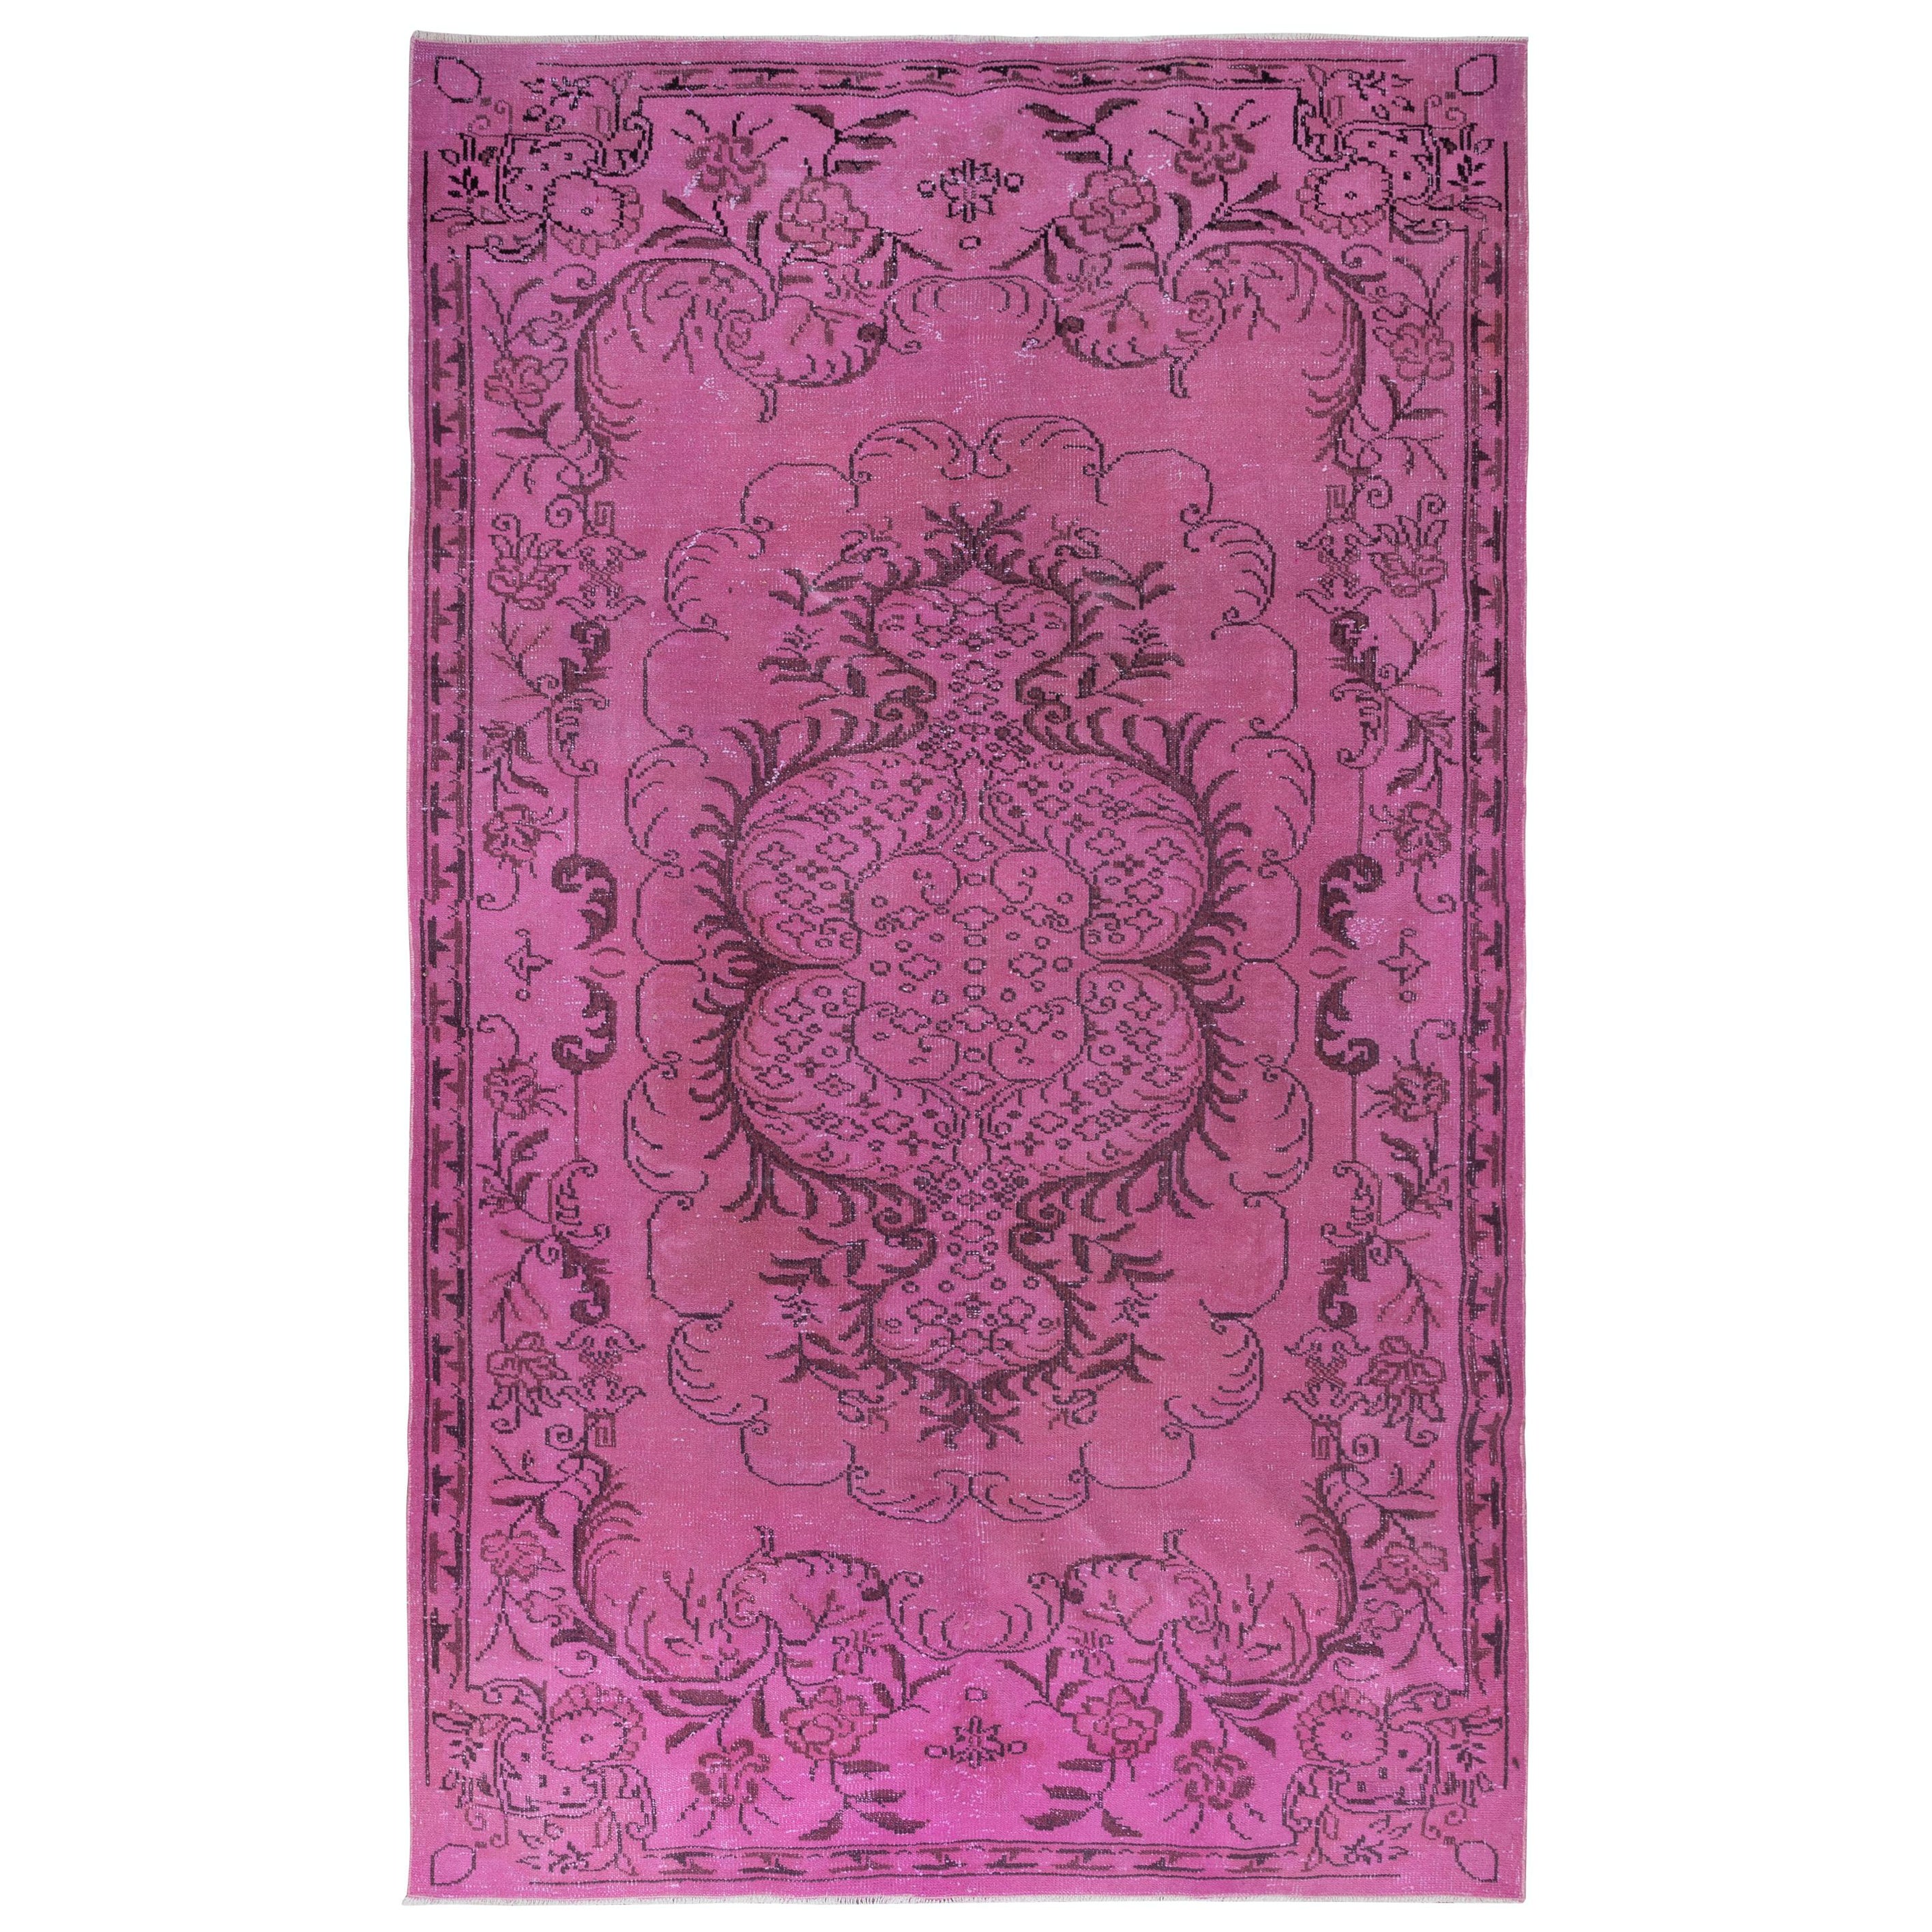 6x10 Ft Modern Medallion Design Rug in Pink, Handwoven and Handknotted in Turkey